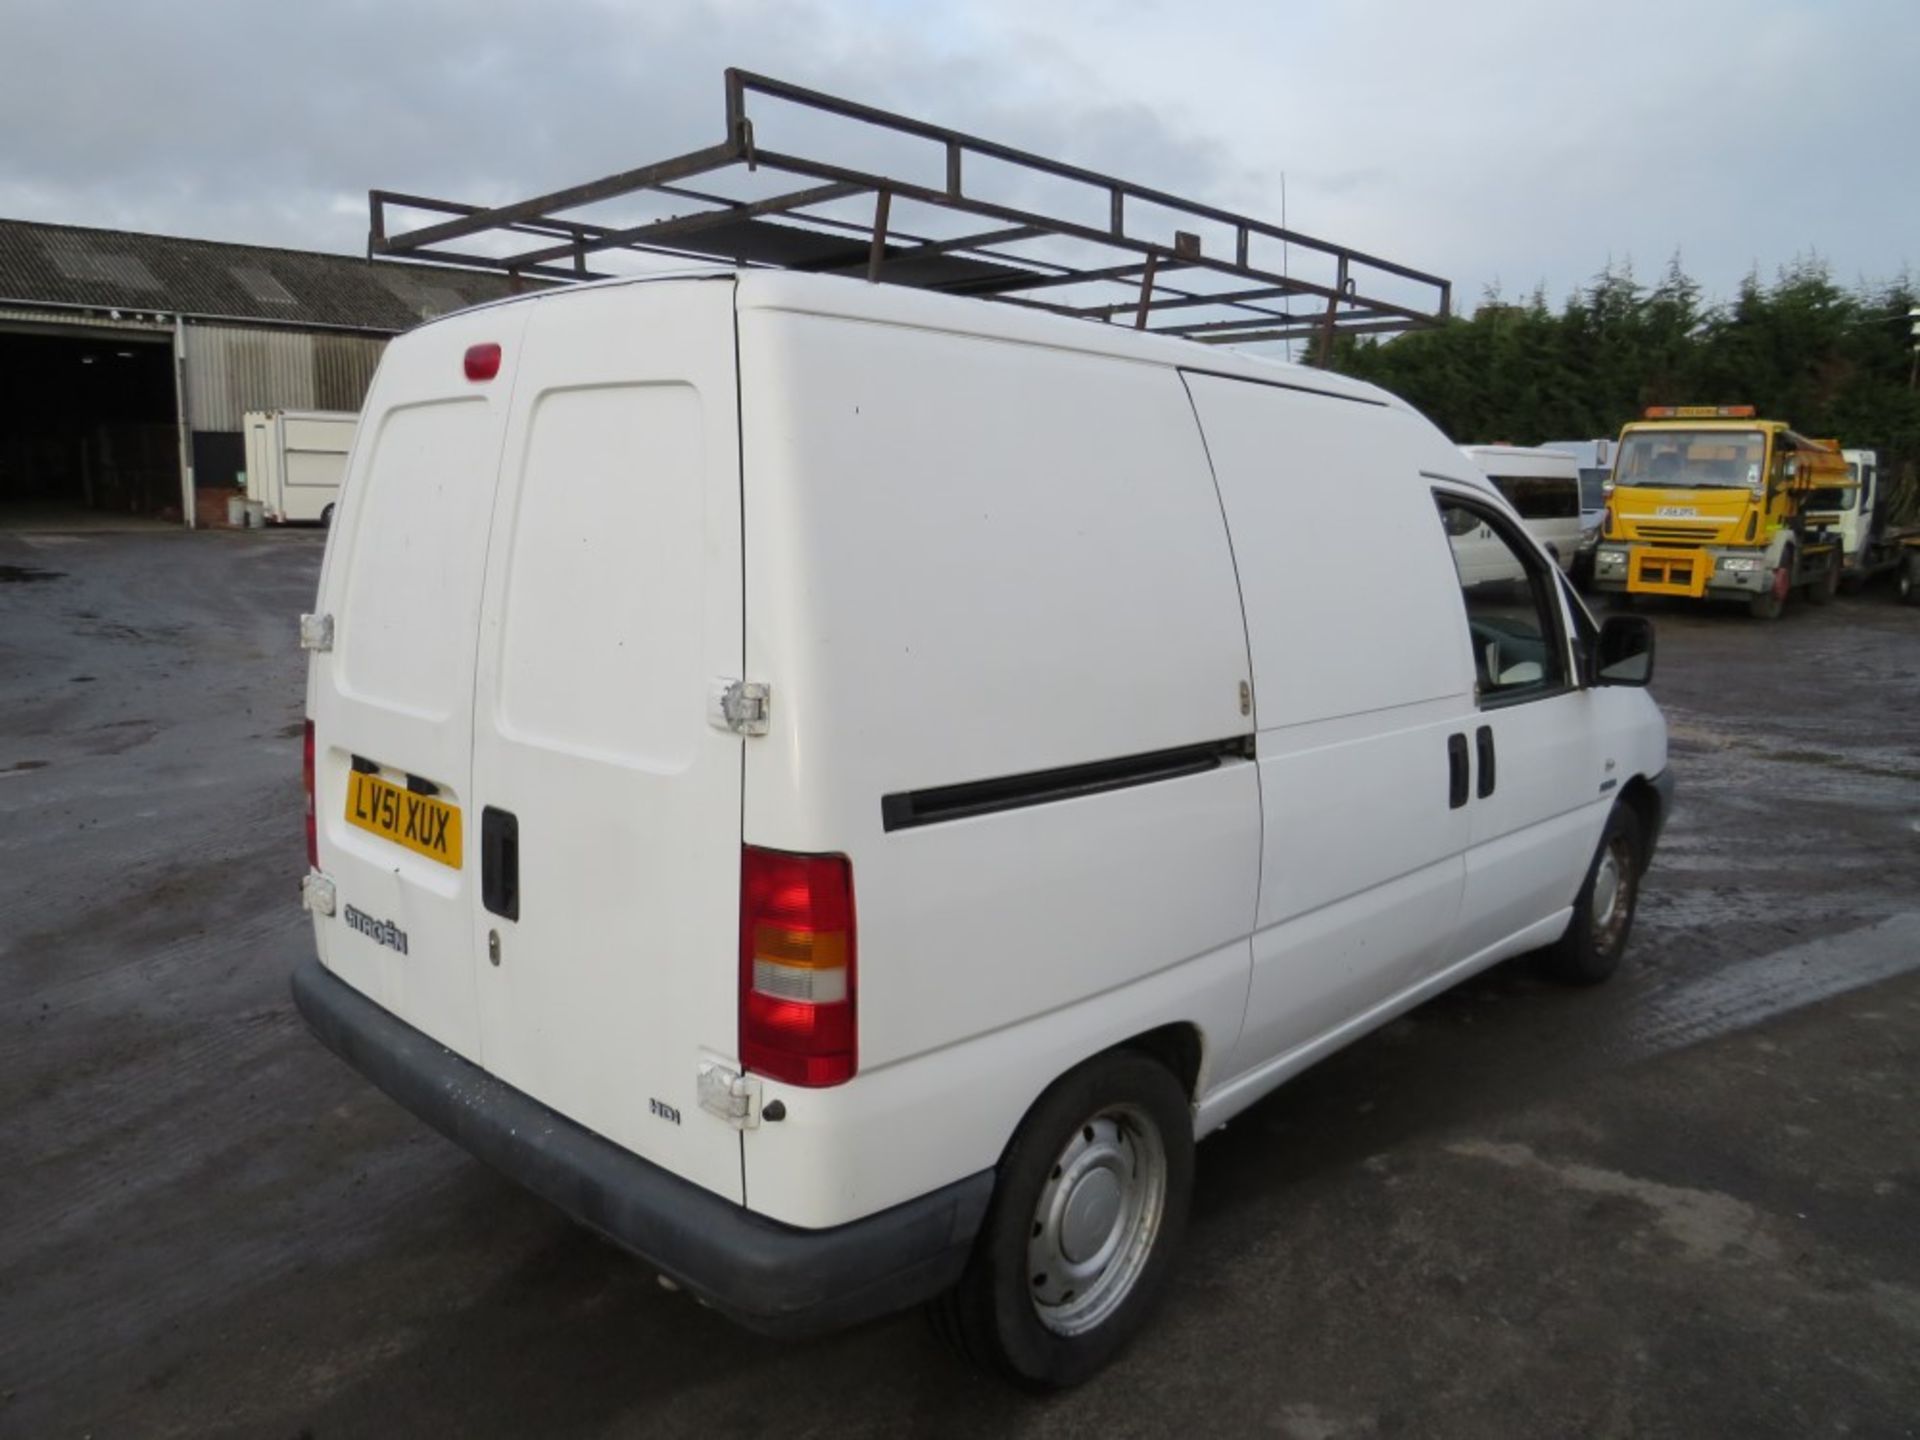 51 reg CITROEN DISPATCH HDI (DIRECT COUNCIL) 1ST REG 10/01, TEST 04/20, V5 HERE, 2 FORMER KEEPERS [+ - Image 4 of 6